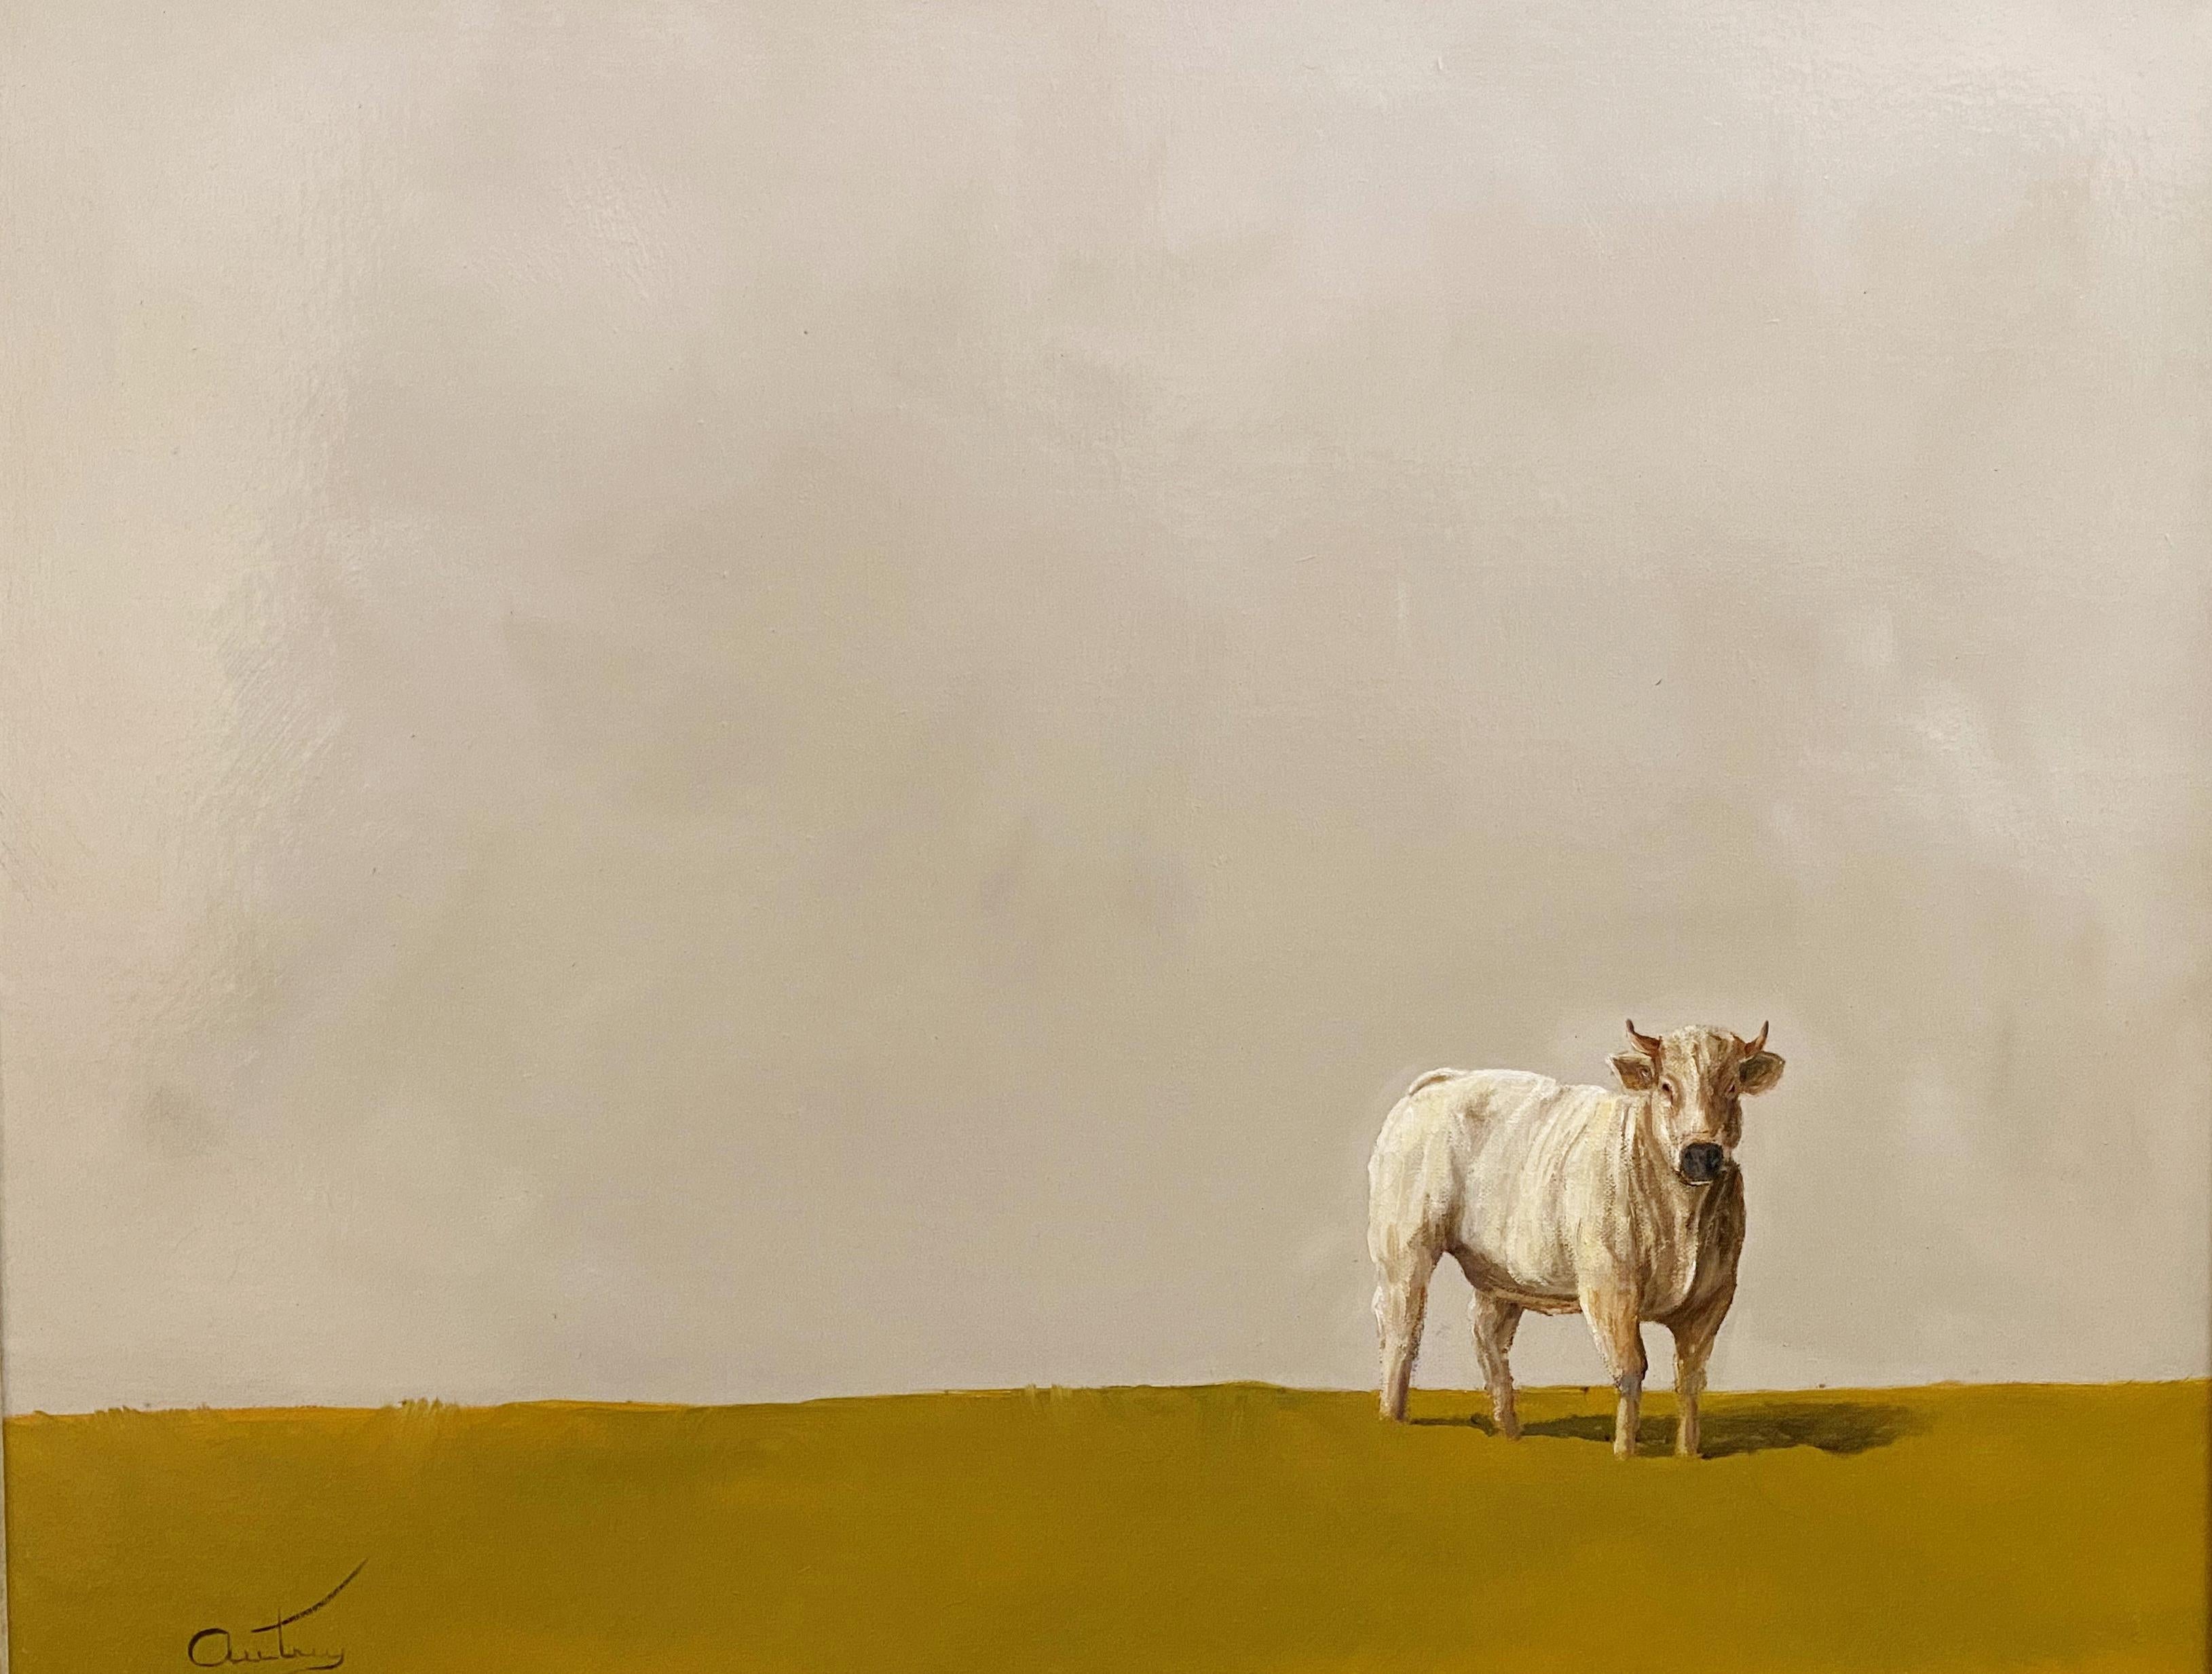 Bovine, Realism, Realist, Light/ Shadow, Texas Cattle, Rodeo, Bos (Latin)